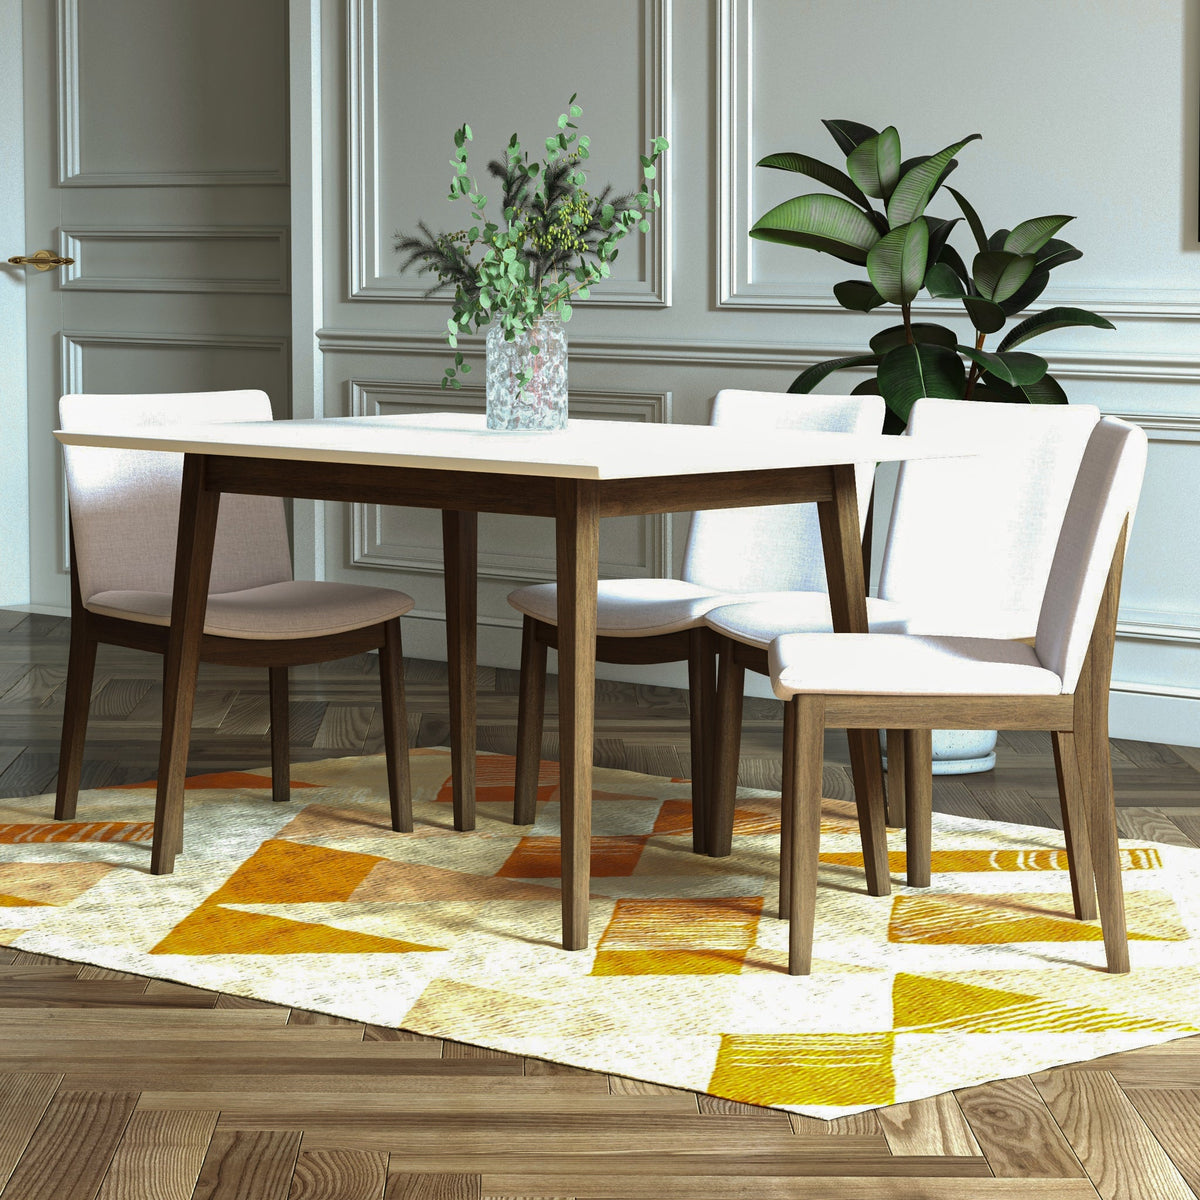 Adira Small White Top Dining Set - 4 Virginia Beige Chairs | MidinMod | TX | Best Furniture stores in Houston